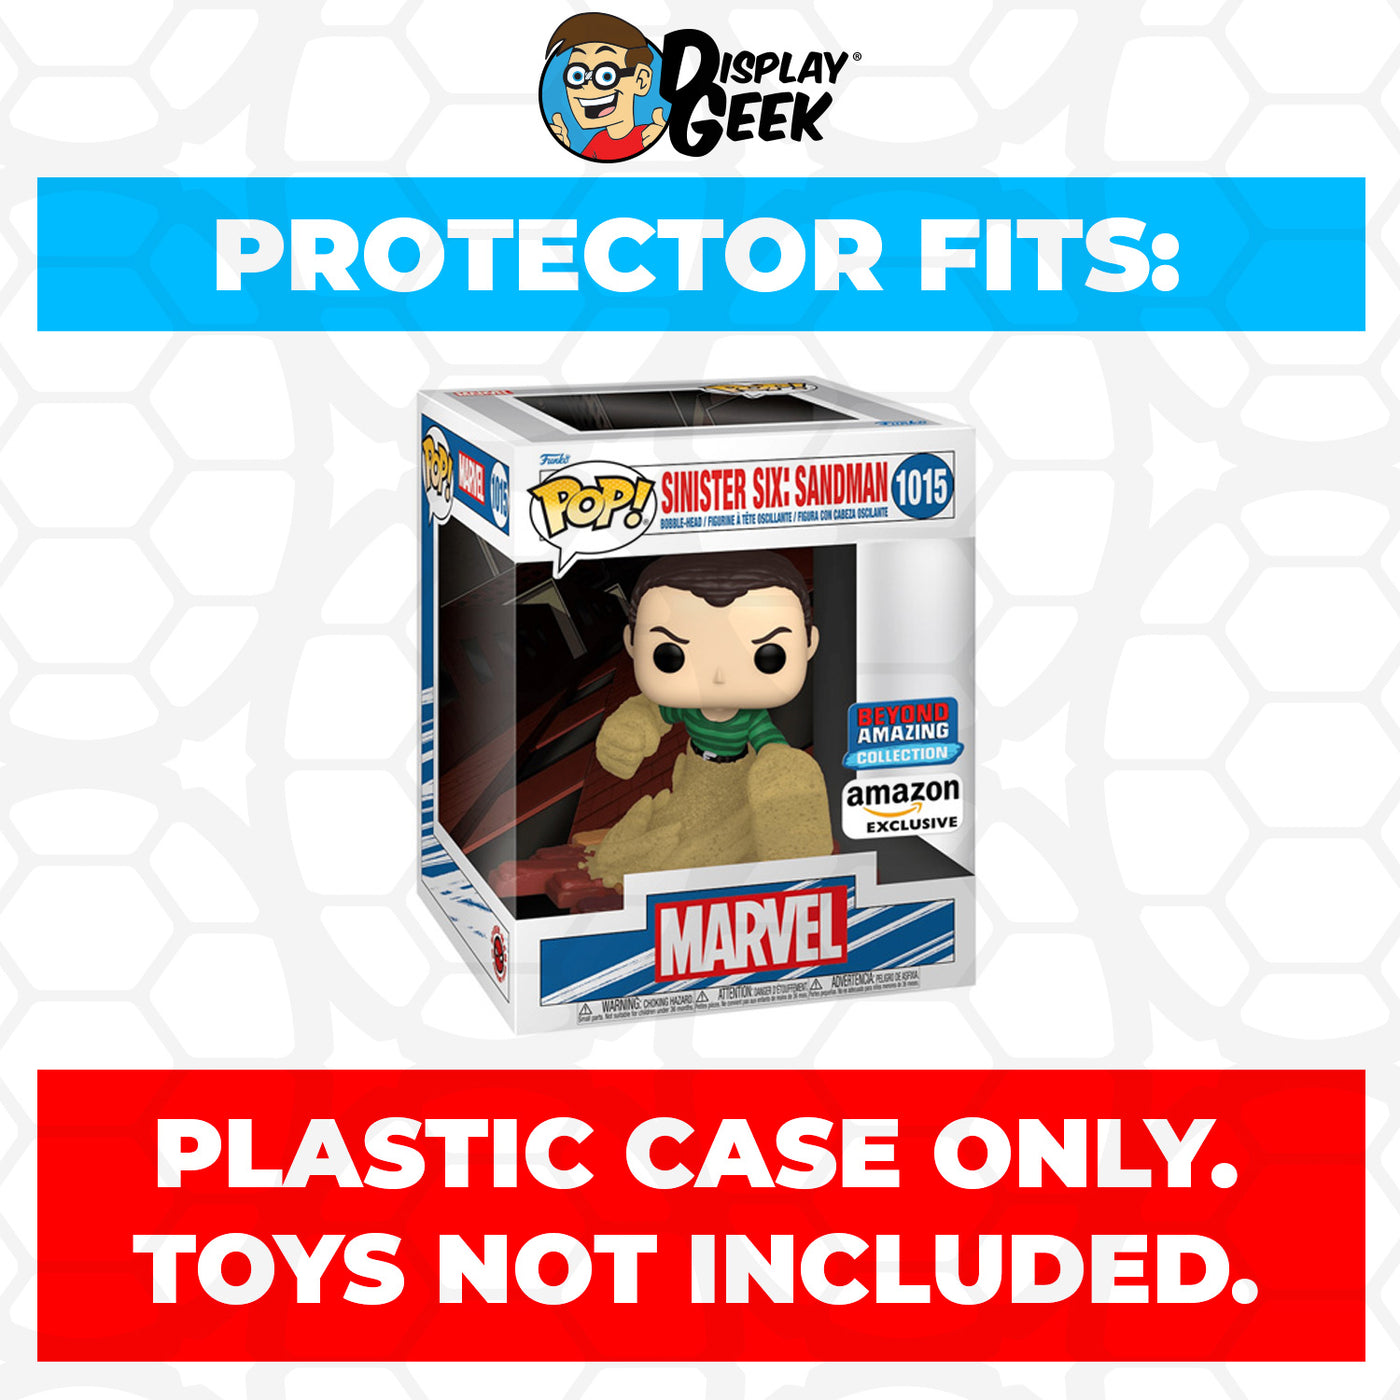 Pop Protector for Sinister Six Sandman #1015 Funko Pop Deluxe on The Protector Guide App by Display Geek